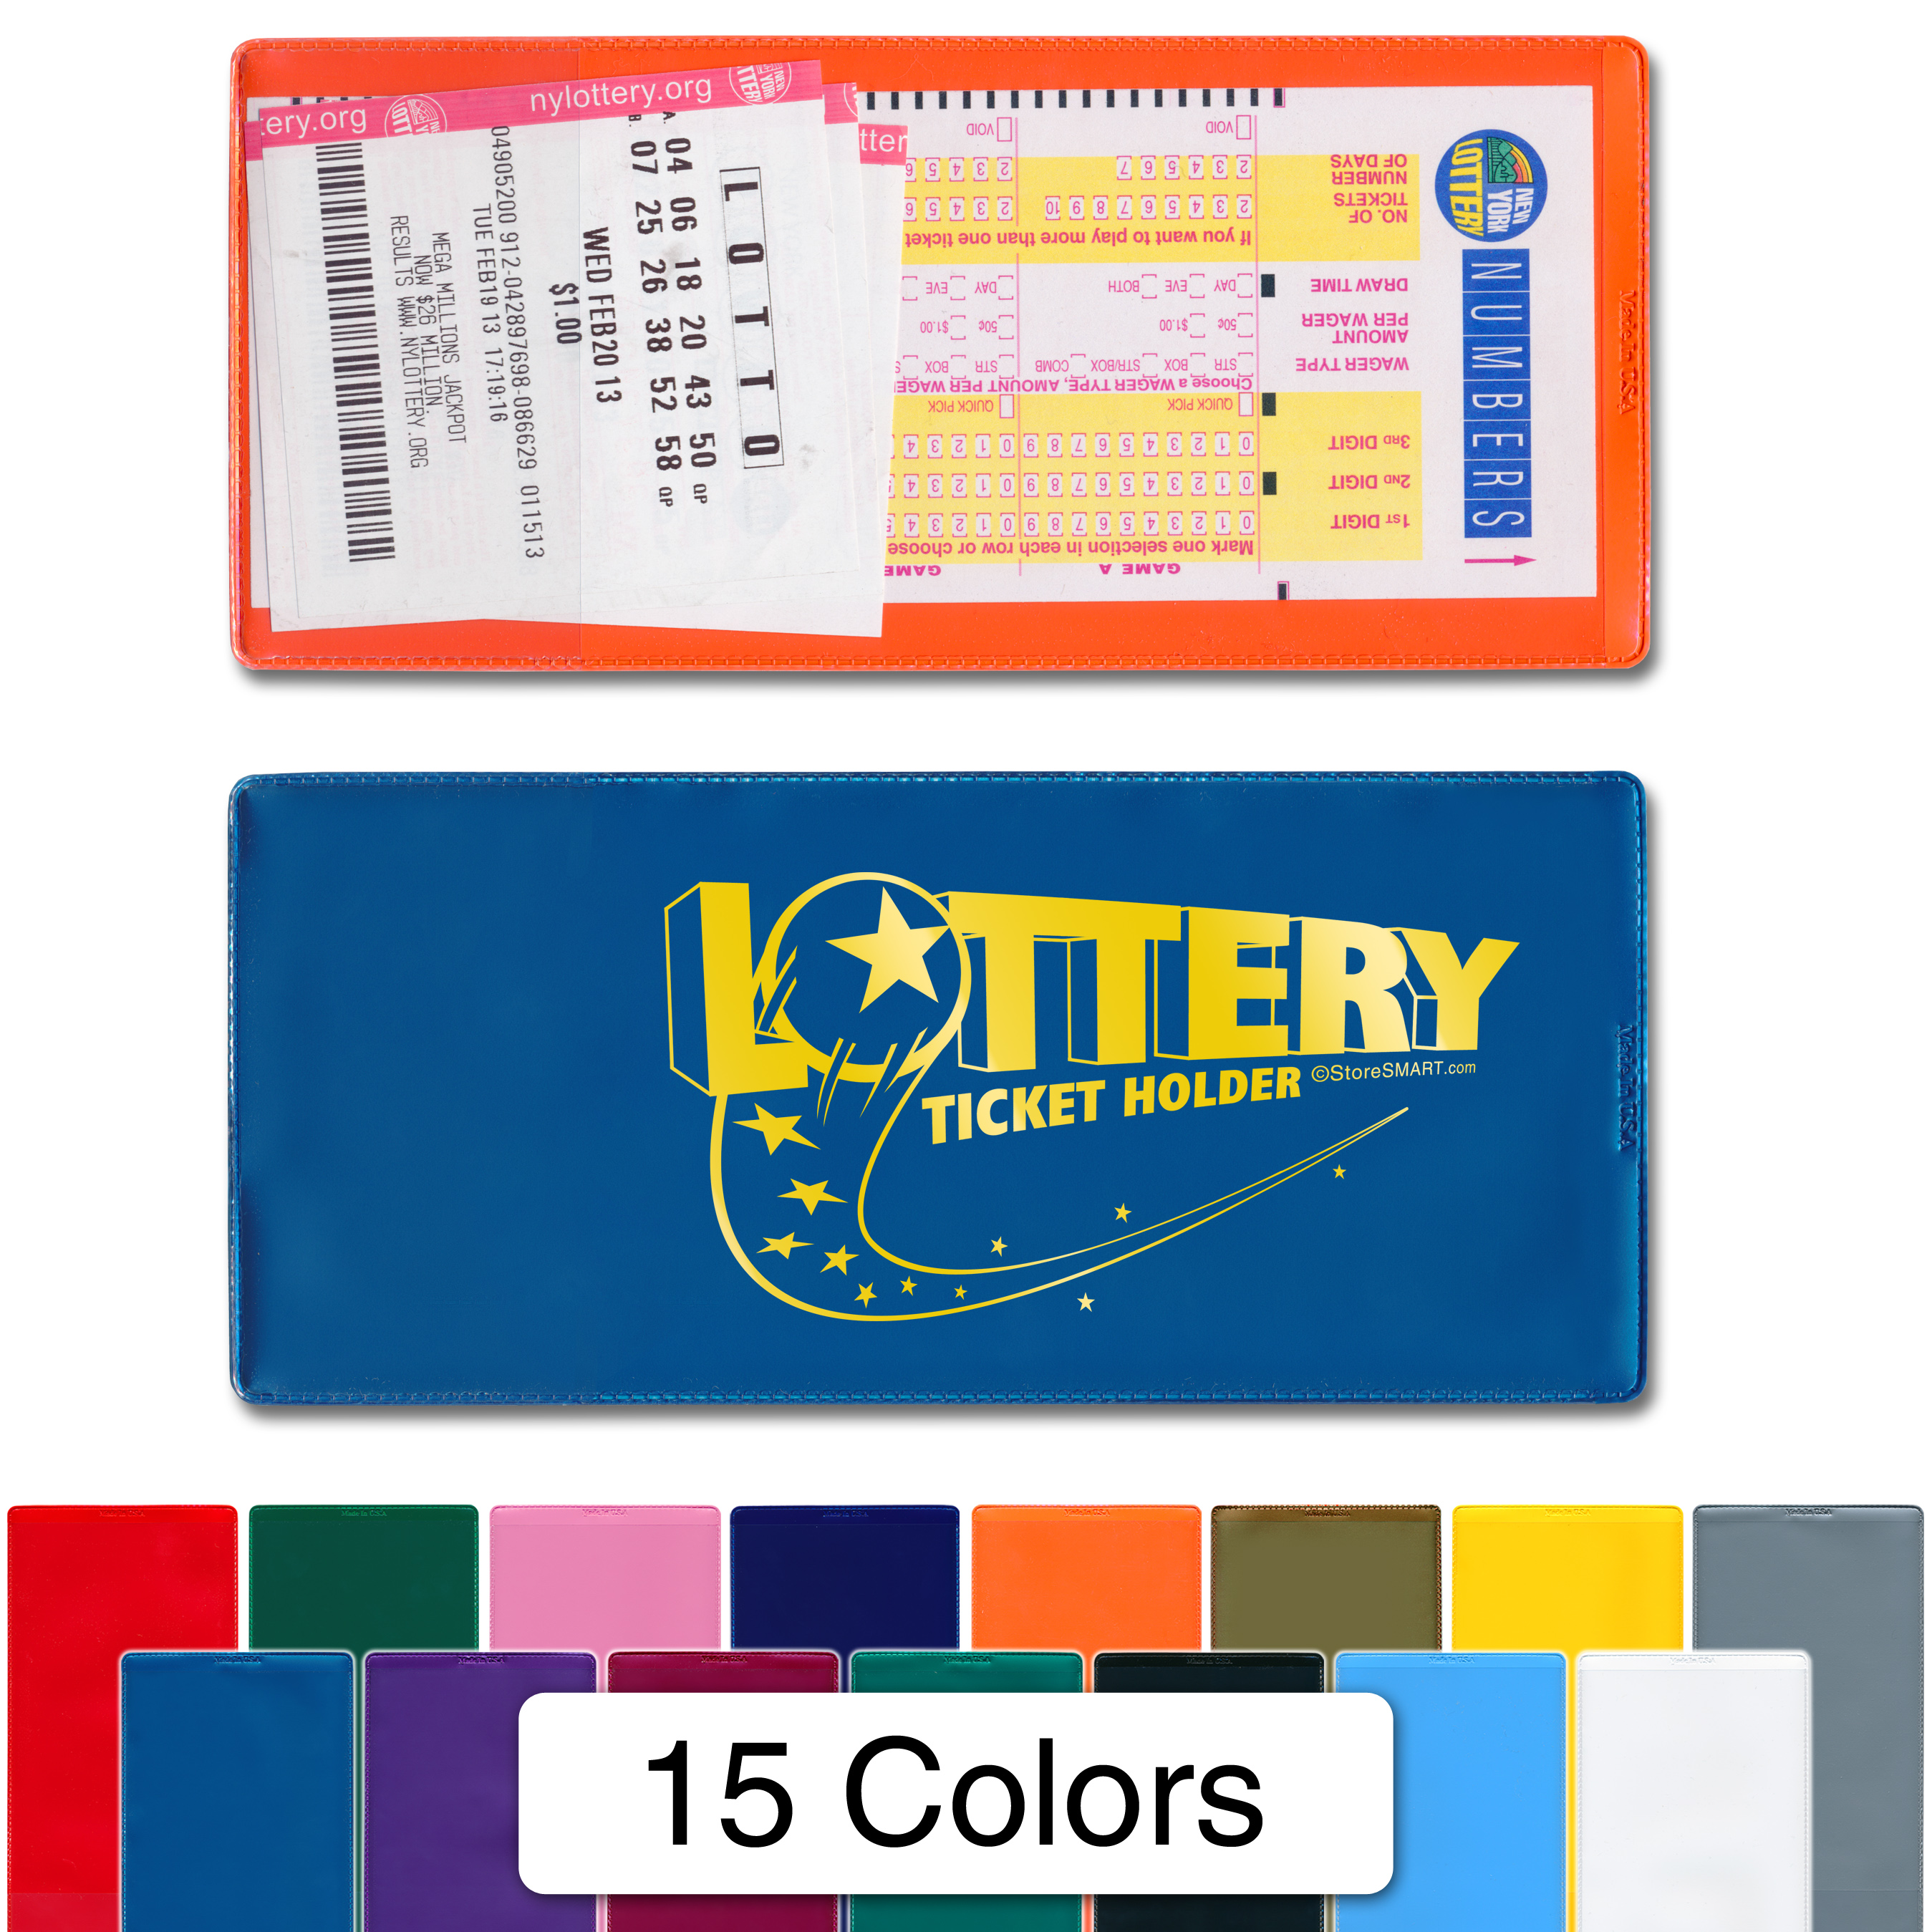 StoreSMART - Lotto Ticket Holders 5-Pack - Plastic - Mystic Metal  Collection (LTMYS)